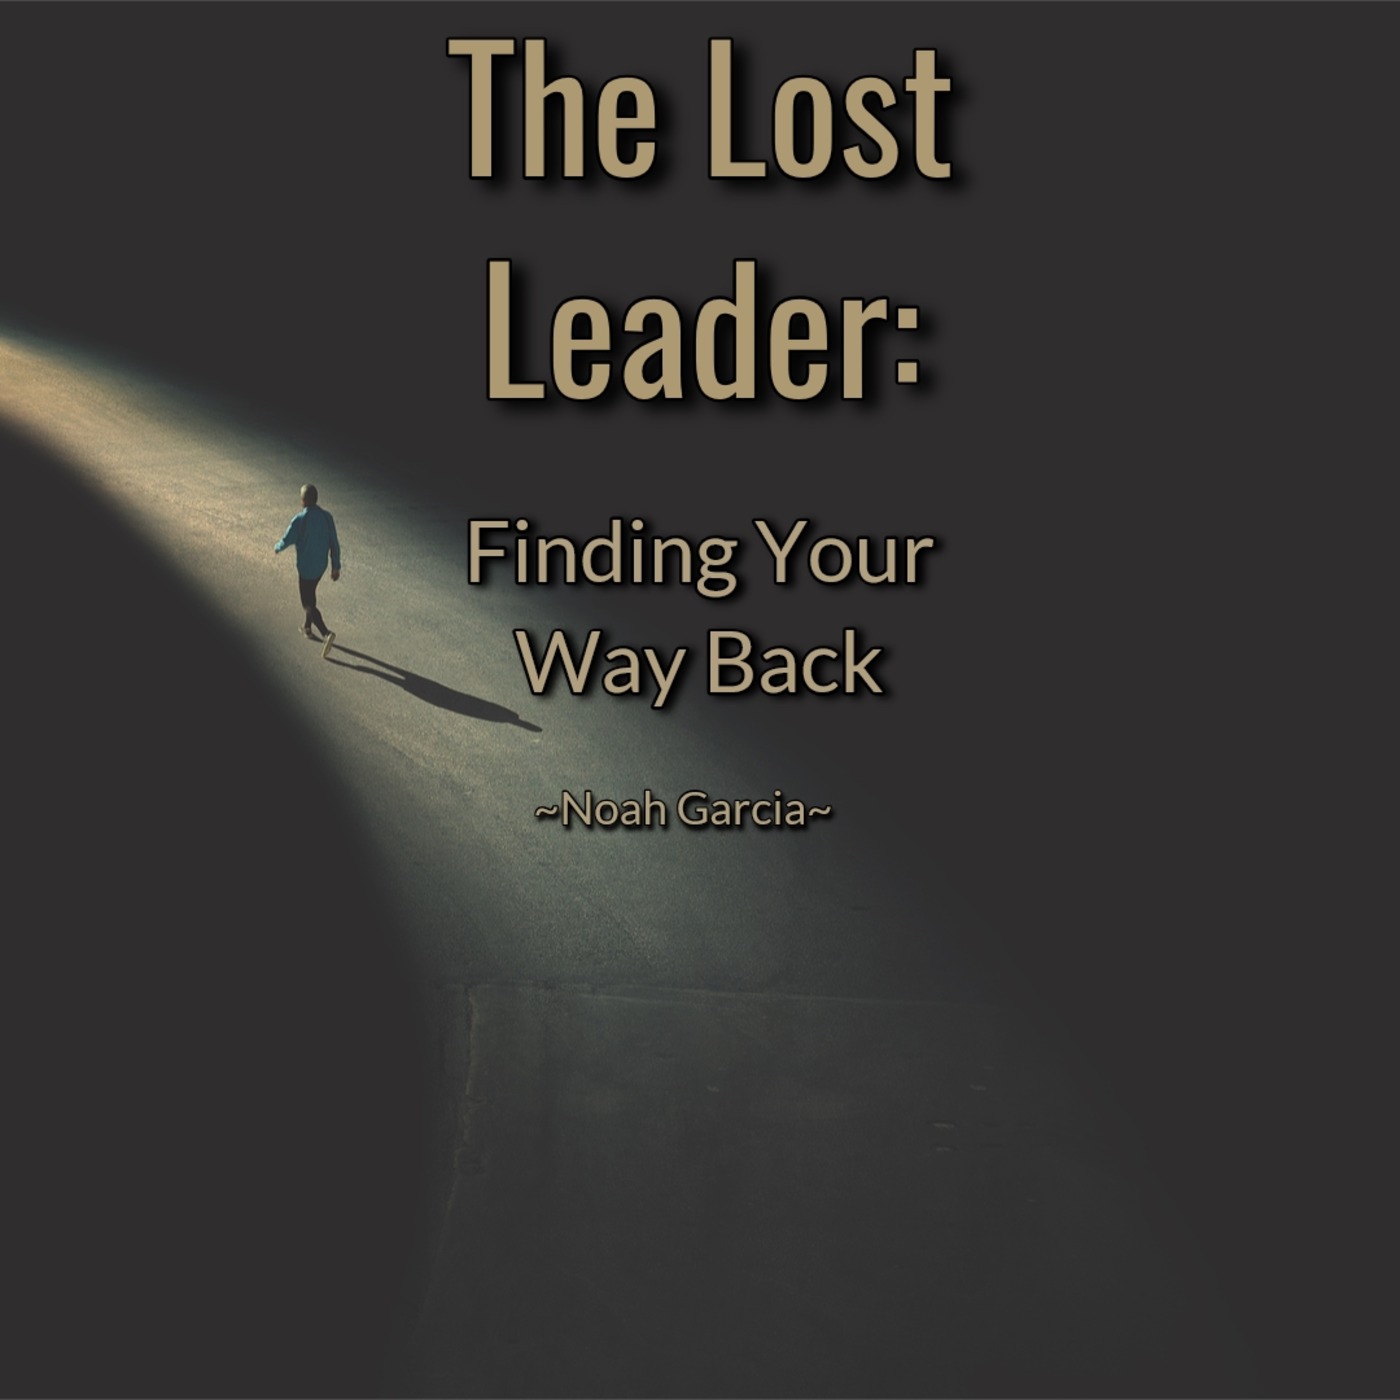 The Lost Leader: Finding Your Way Back